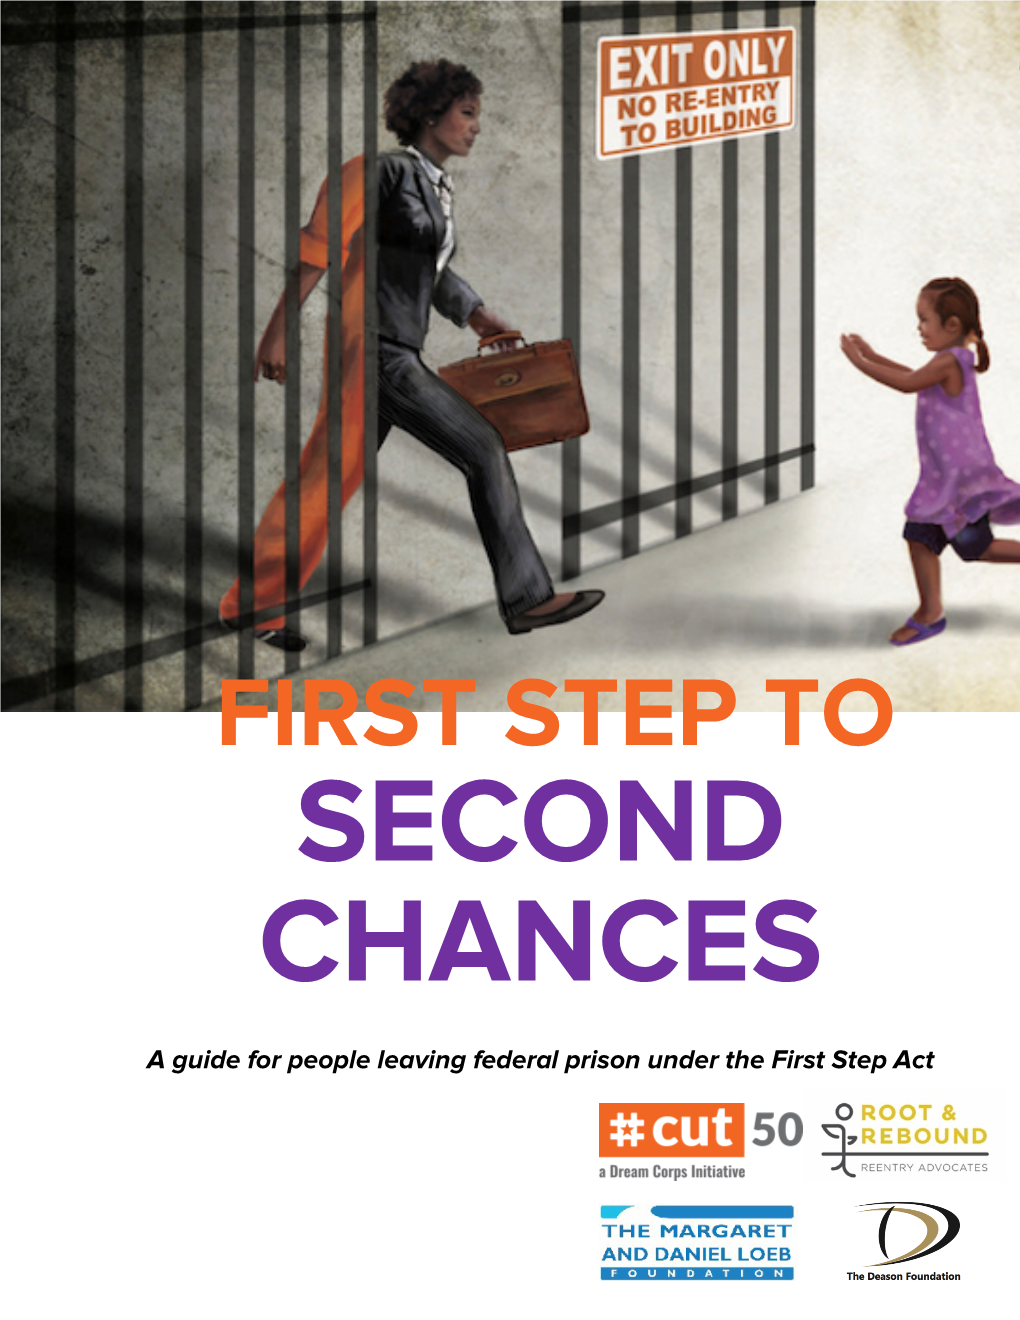 First Step to Second Chances Guide